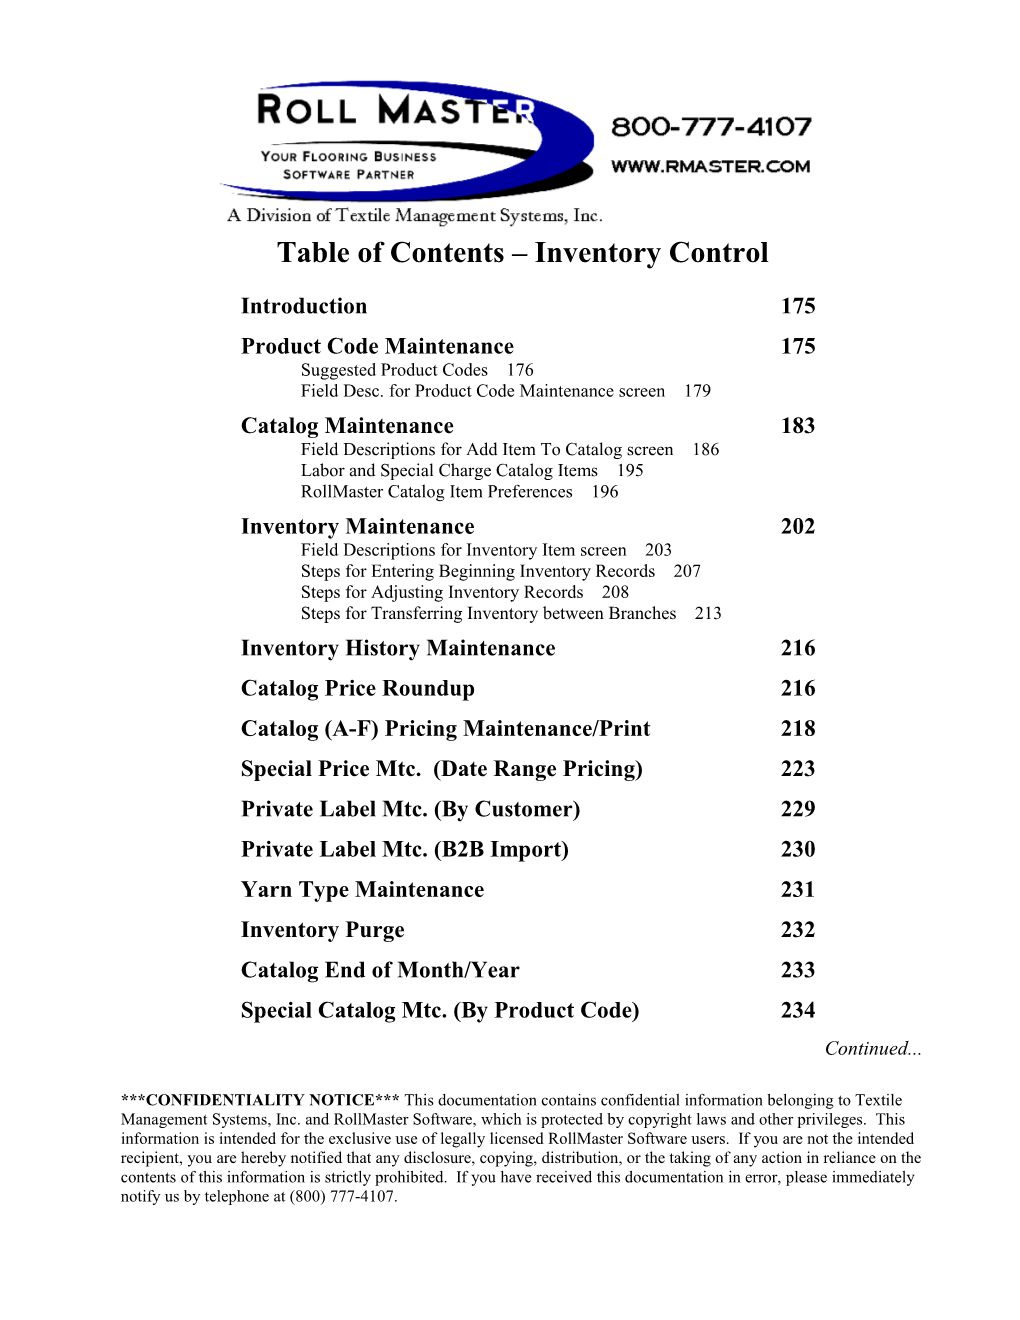 Table of Contents Inventory Control